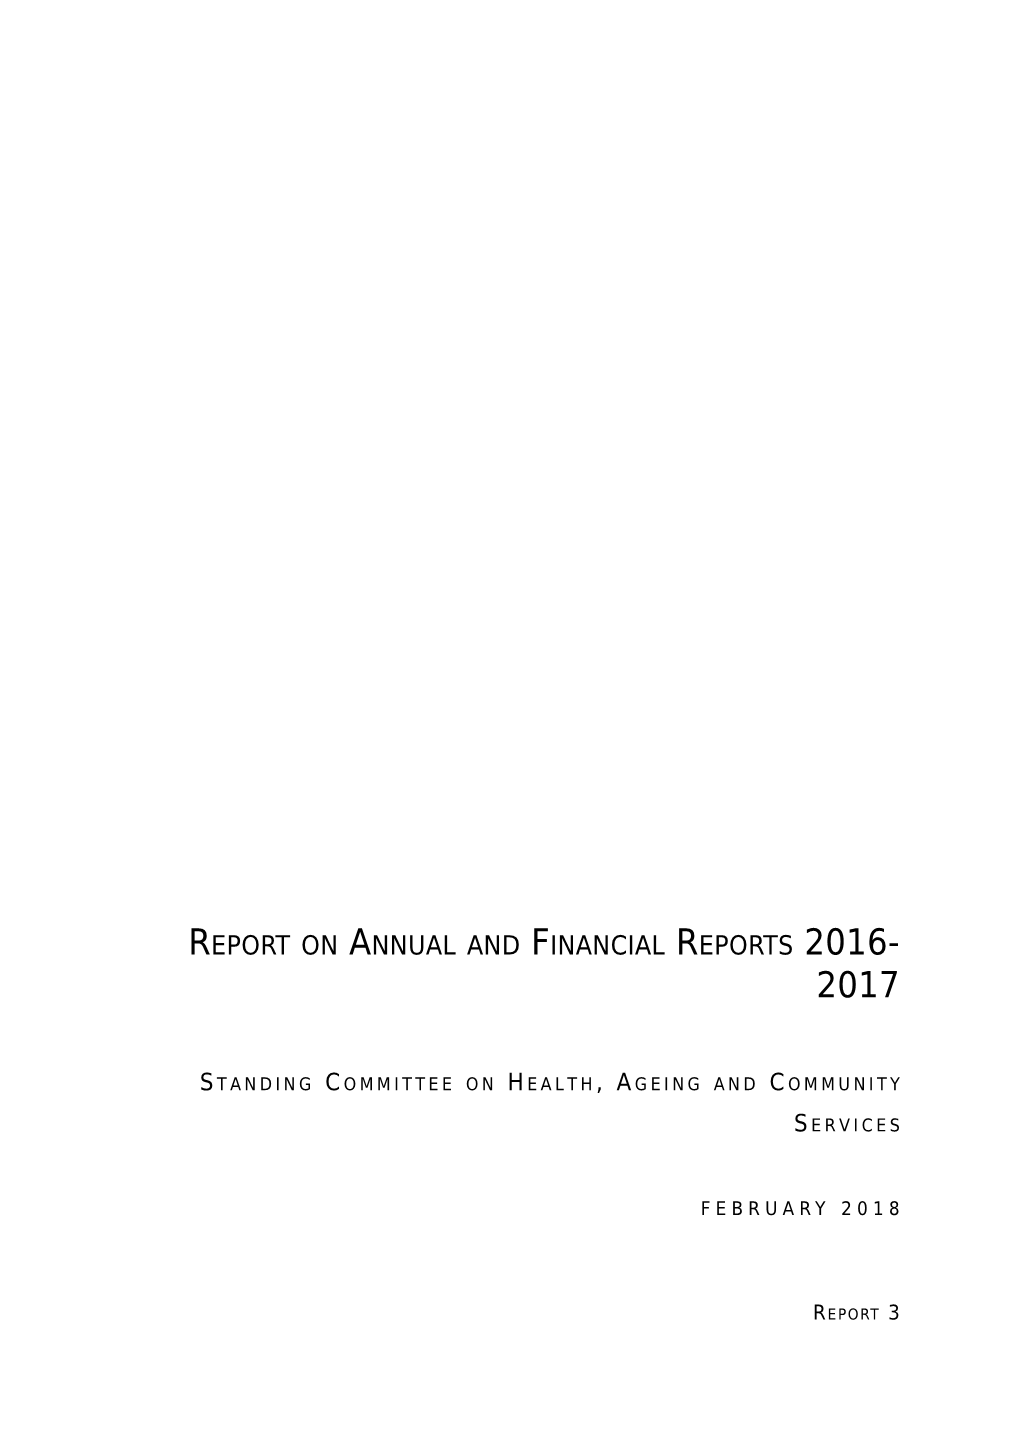 Report on Annual and Financial Reports 2016-2017